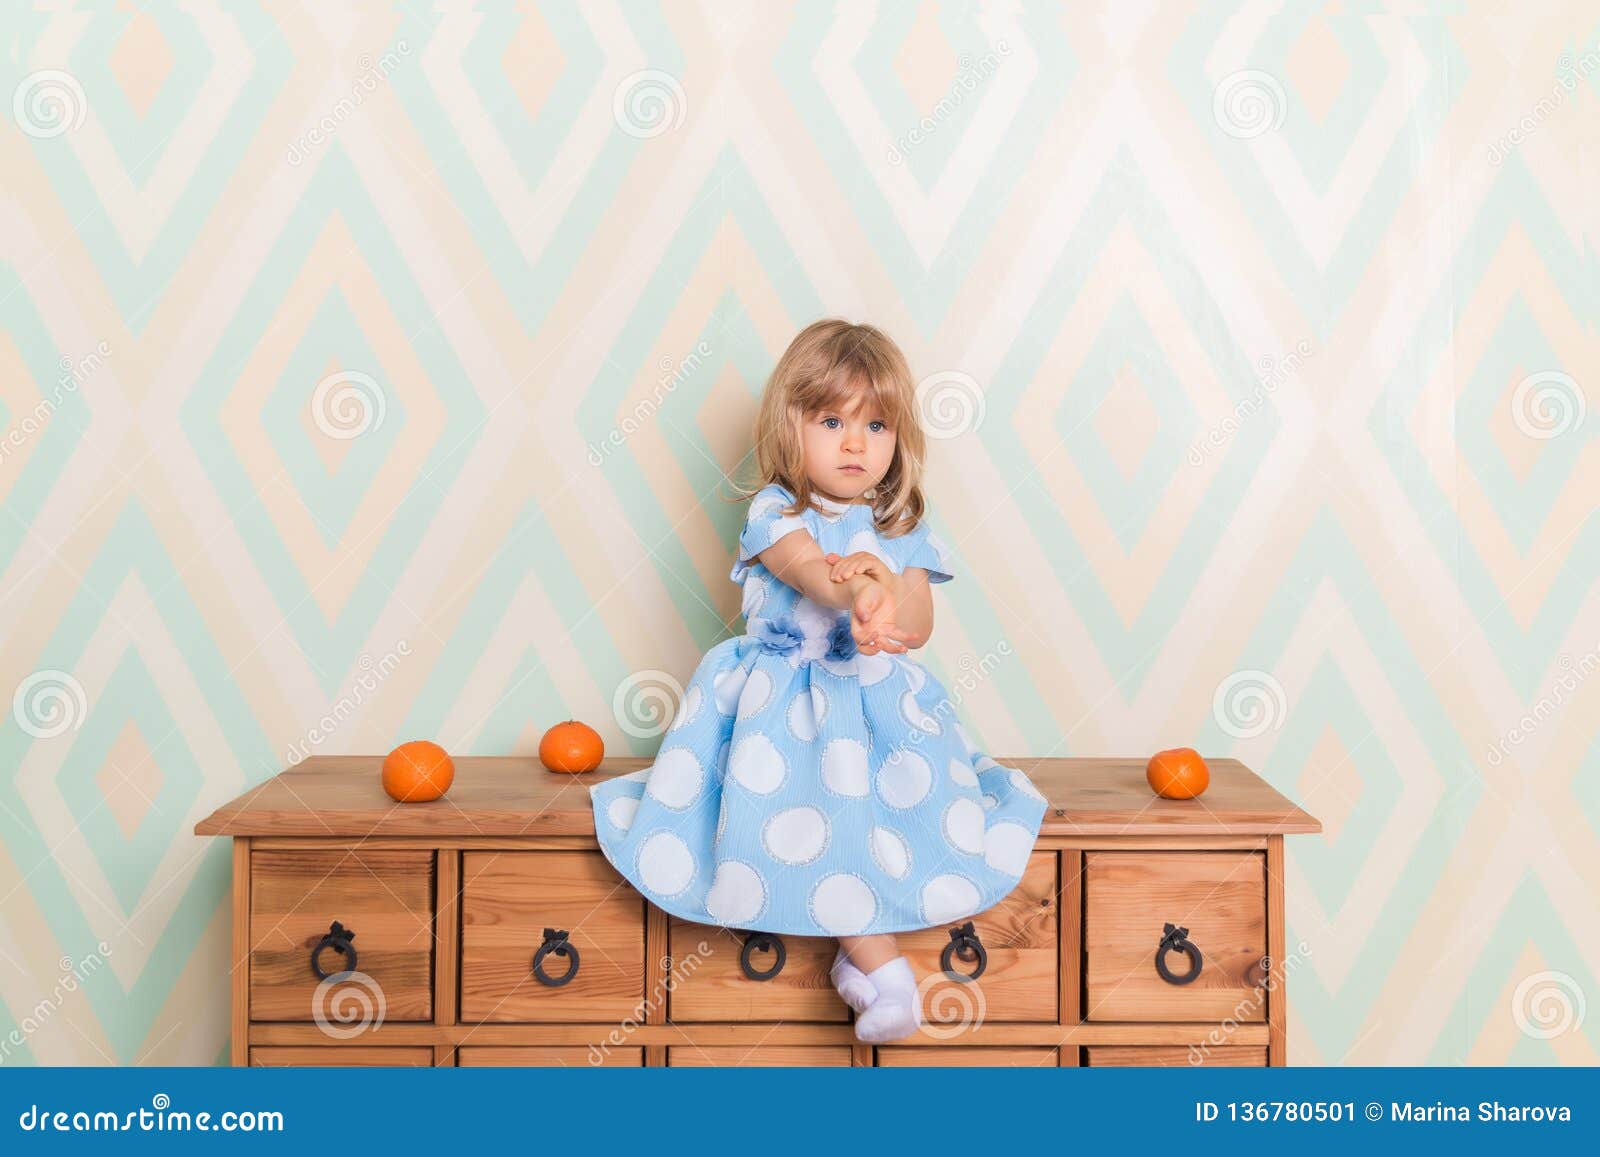 little girl chest of drawers